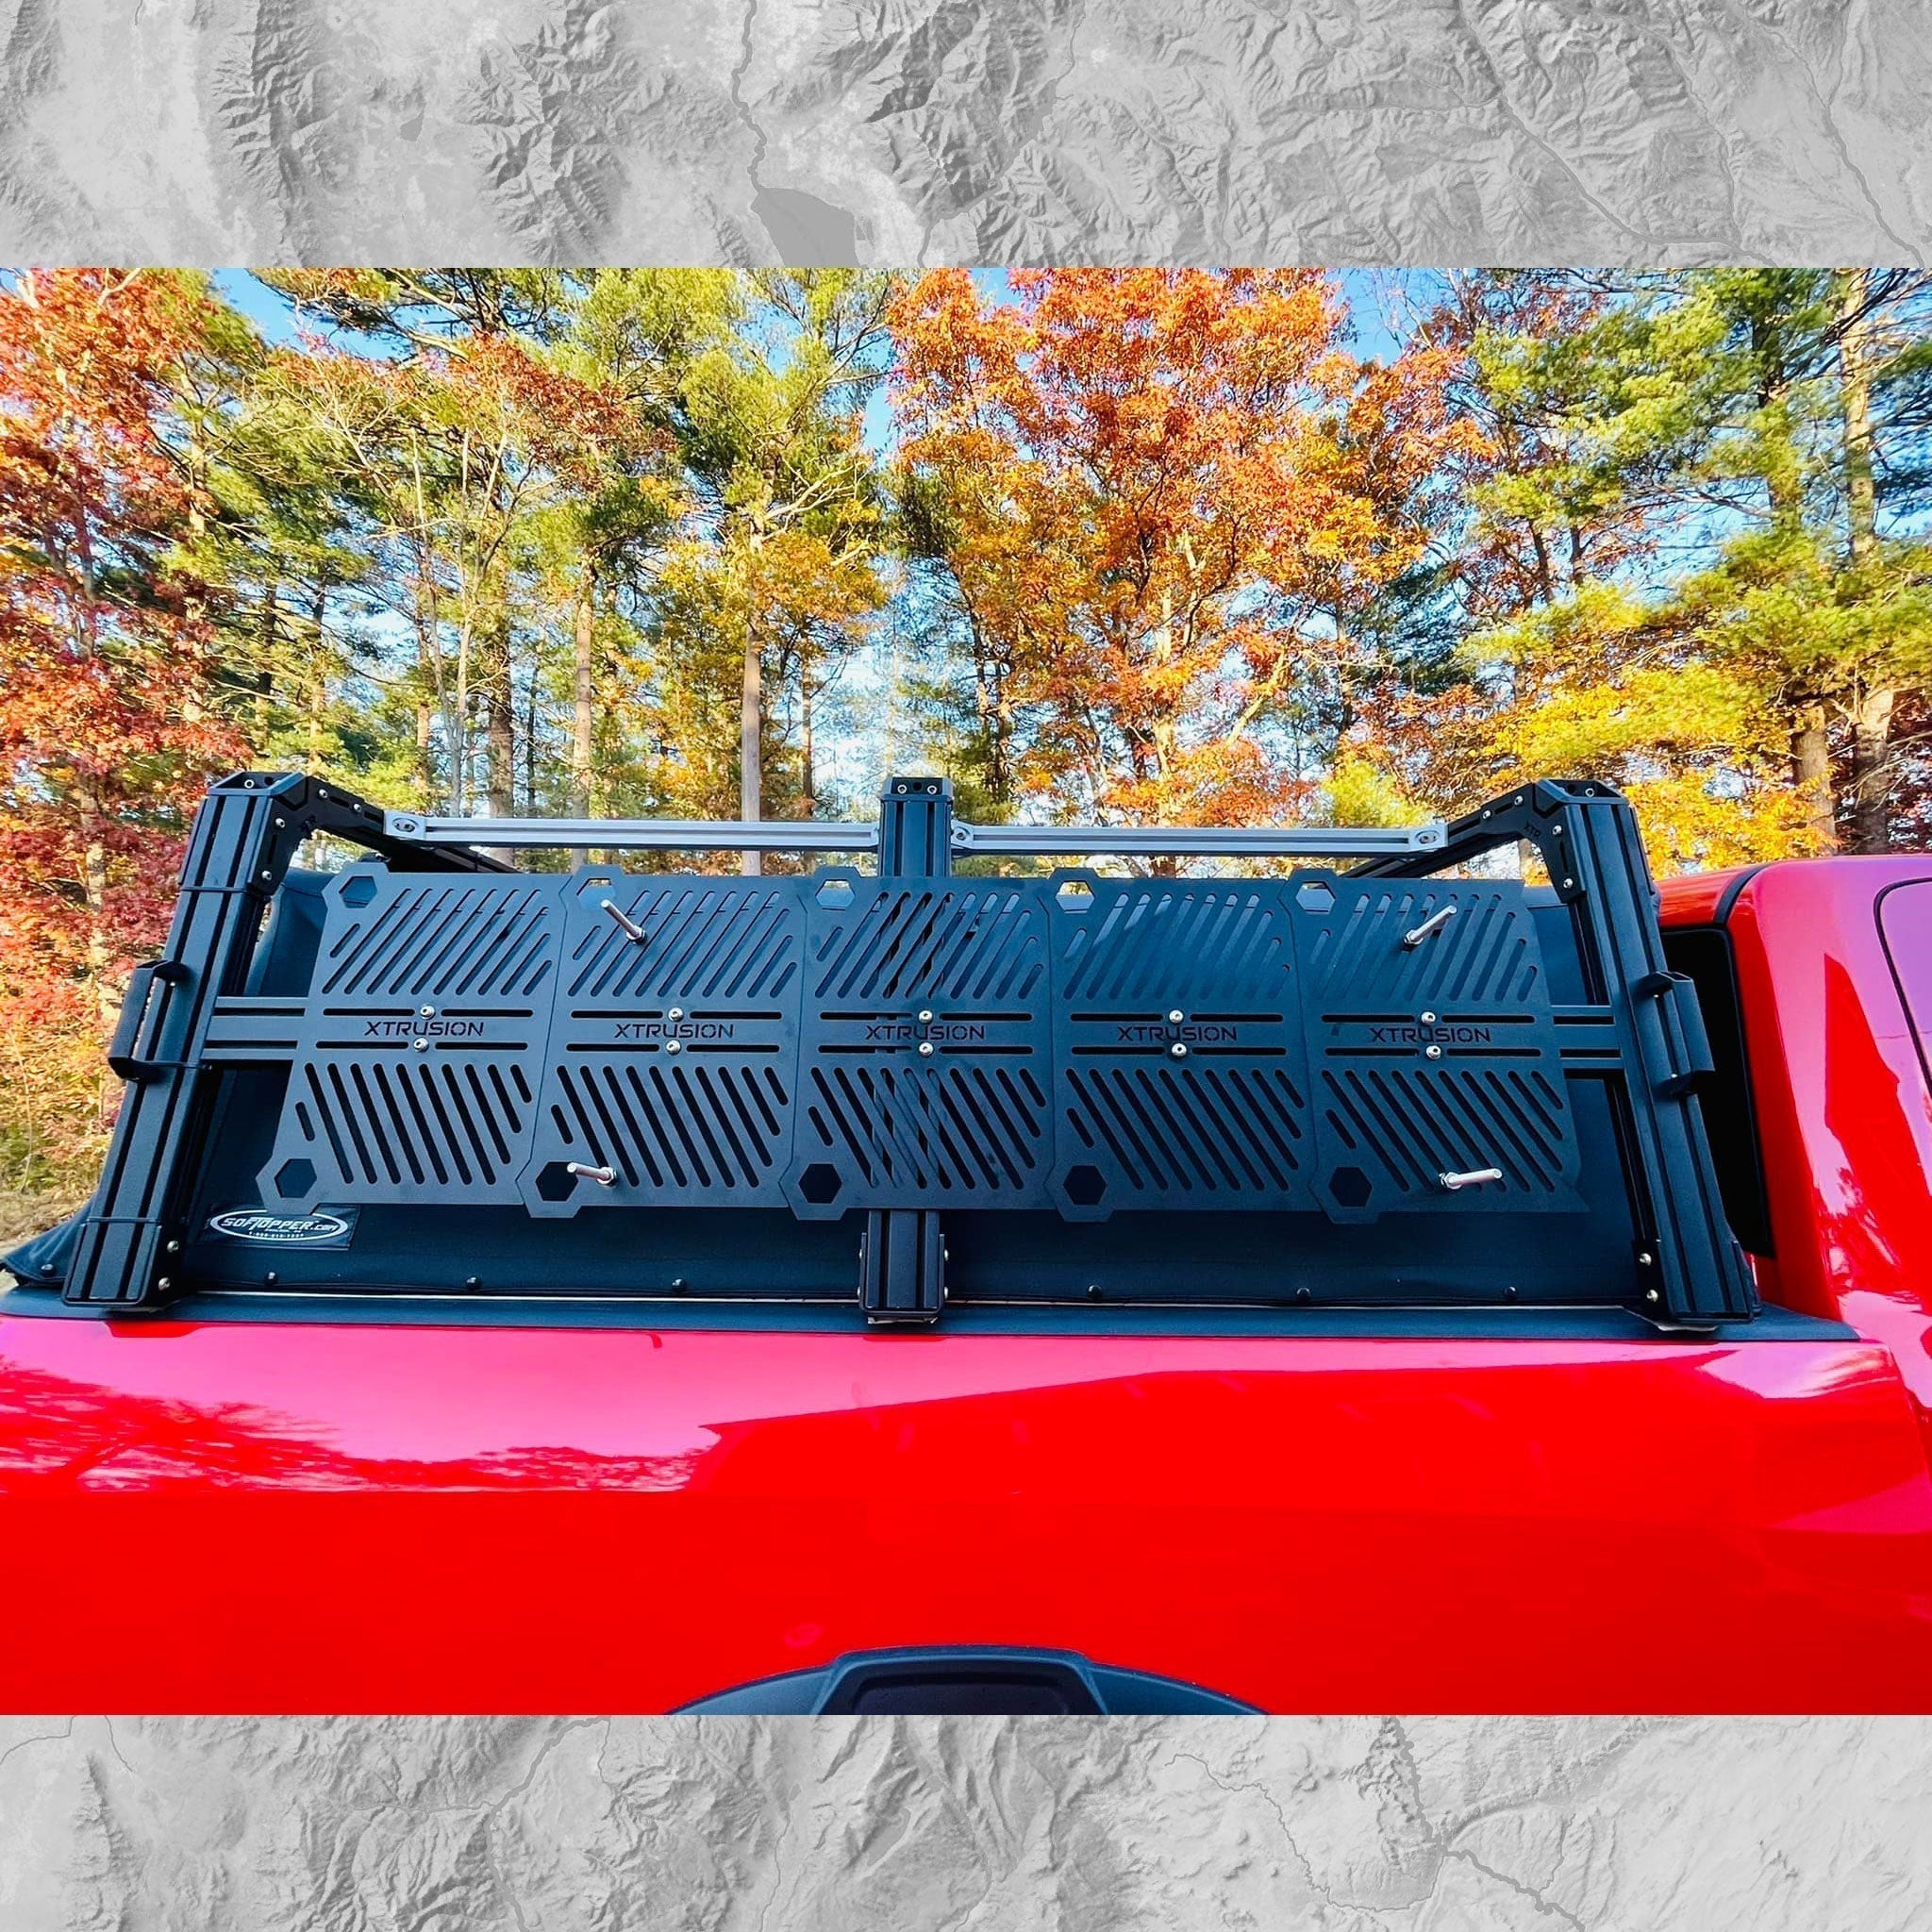 Dodge Ram with soft topper, XRT3 bed rack, and traction board bolts mounted into molle panels